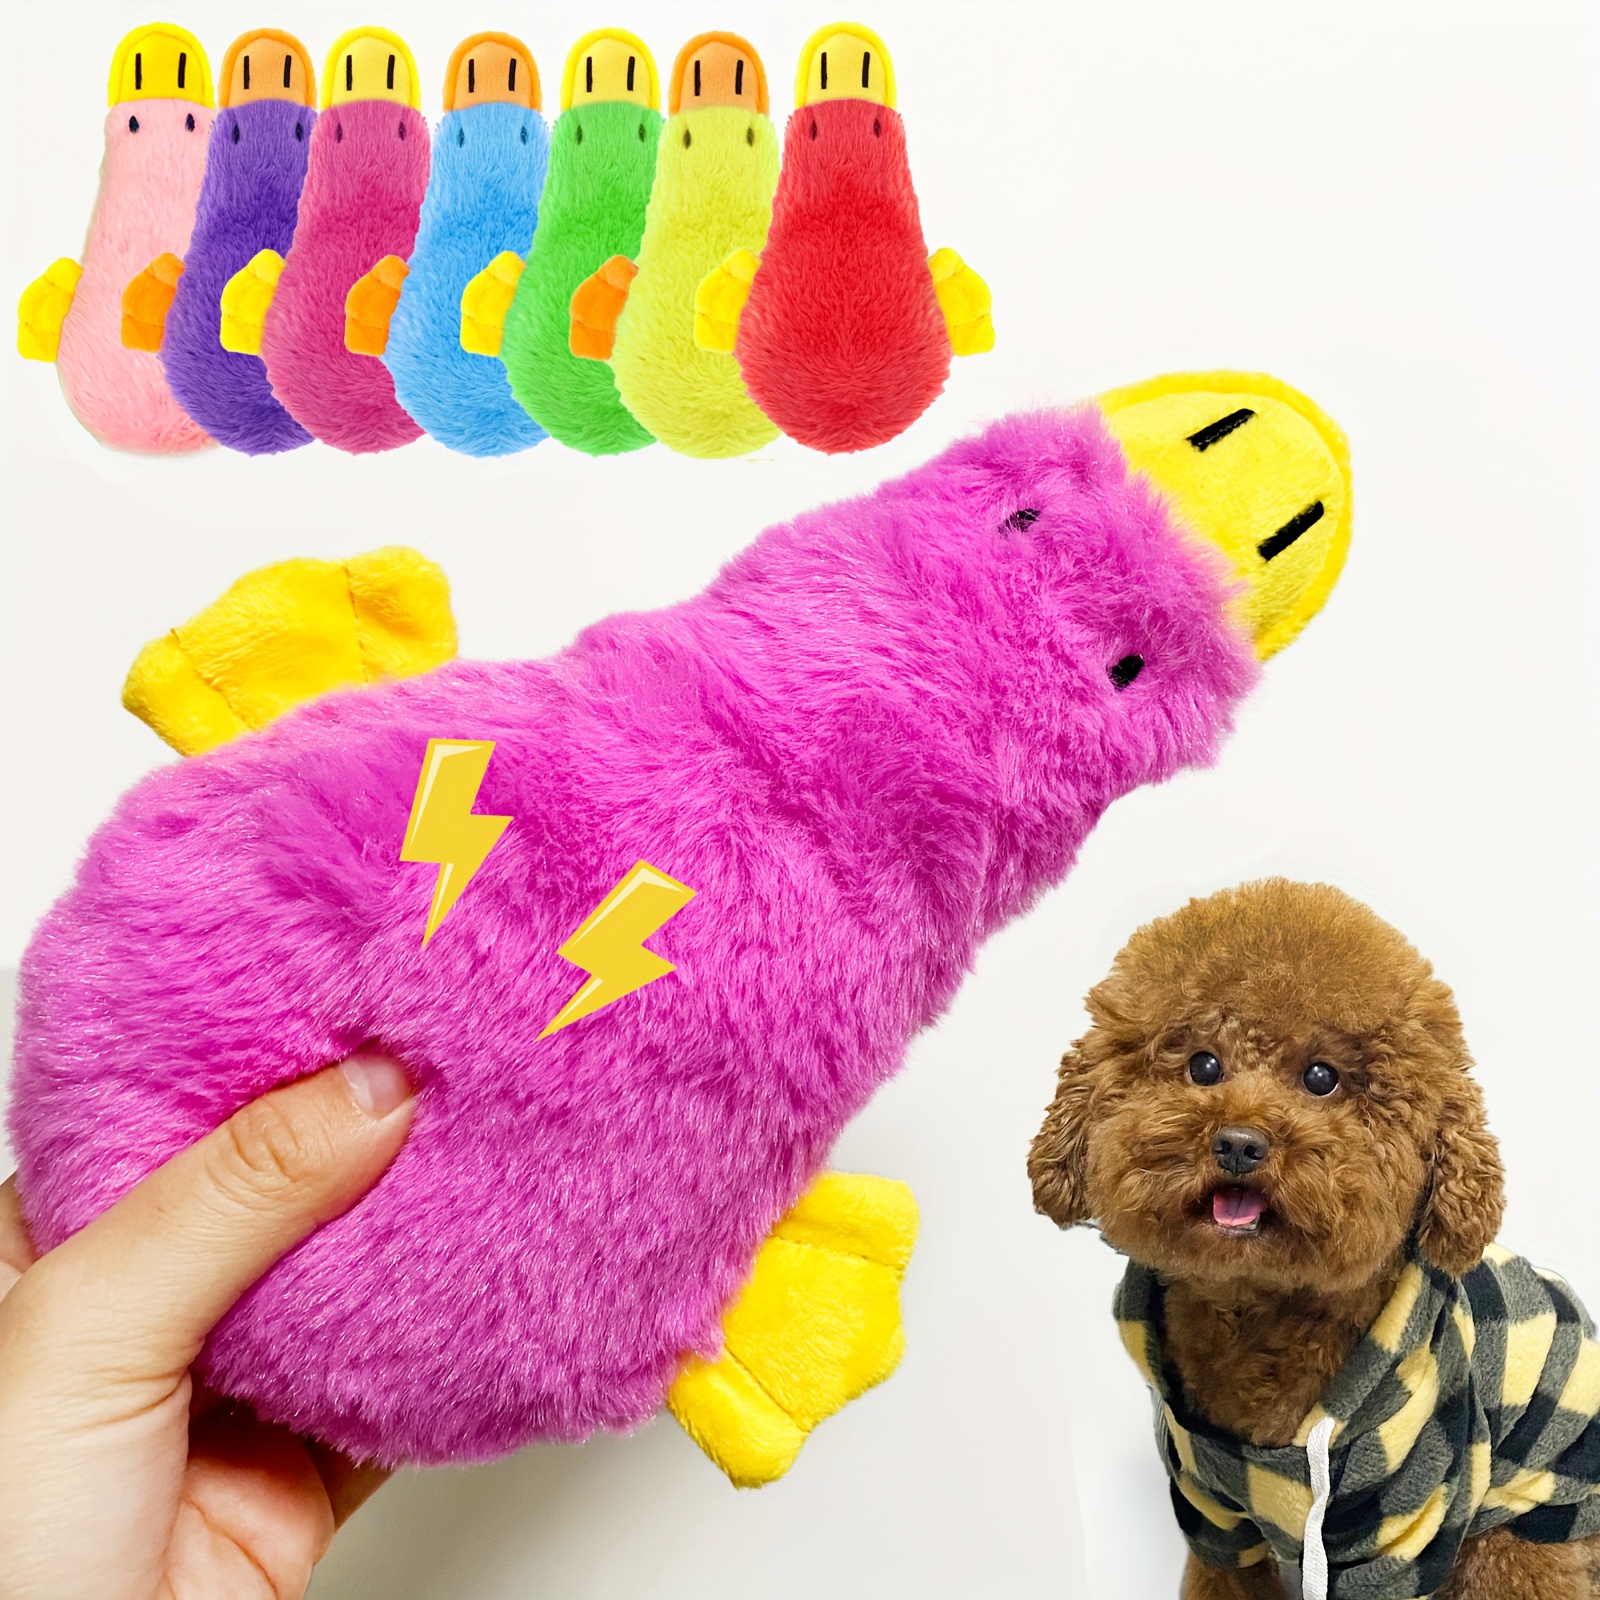 Best Dog Toys  Top-Rated Interactive Toys, Chew Toys, Plush Toys